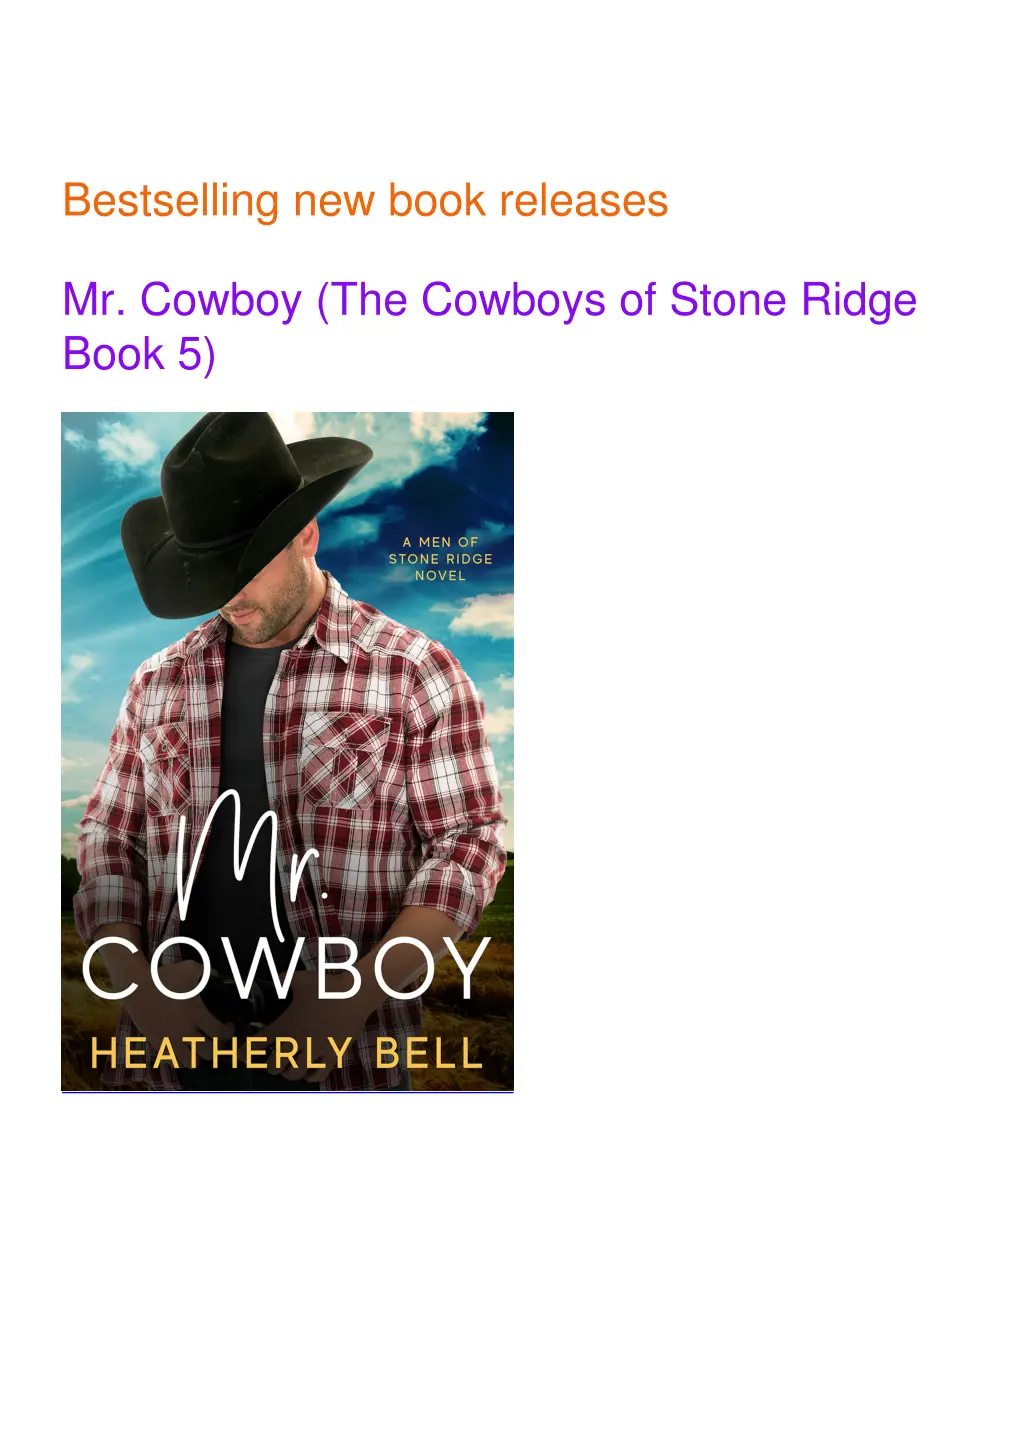 bestselling new book releases mr cowboy